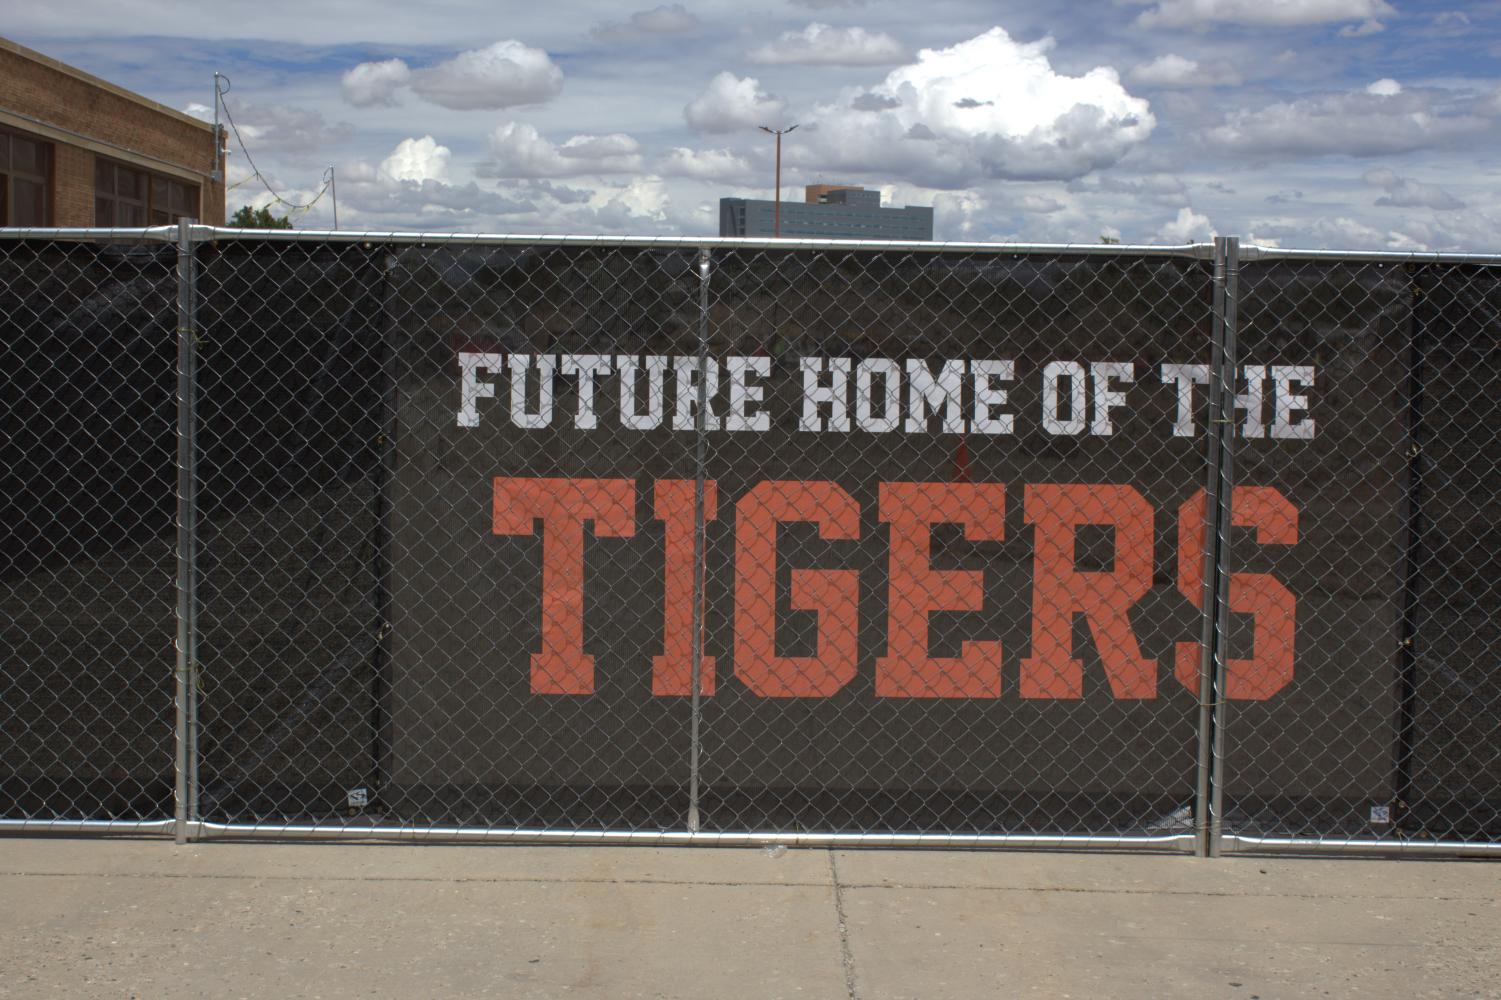 Signs are clear around campus that the Future home of the Tigers is under construction.